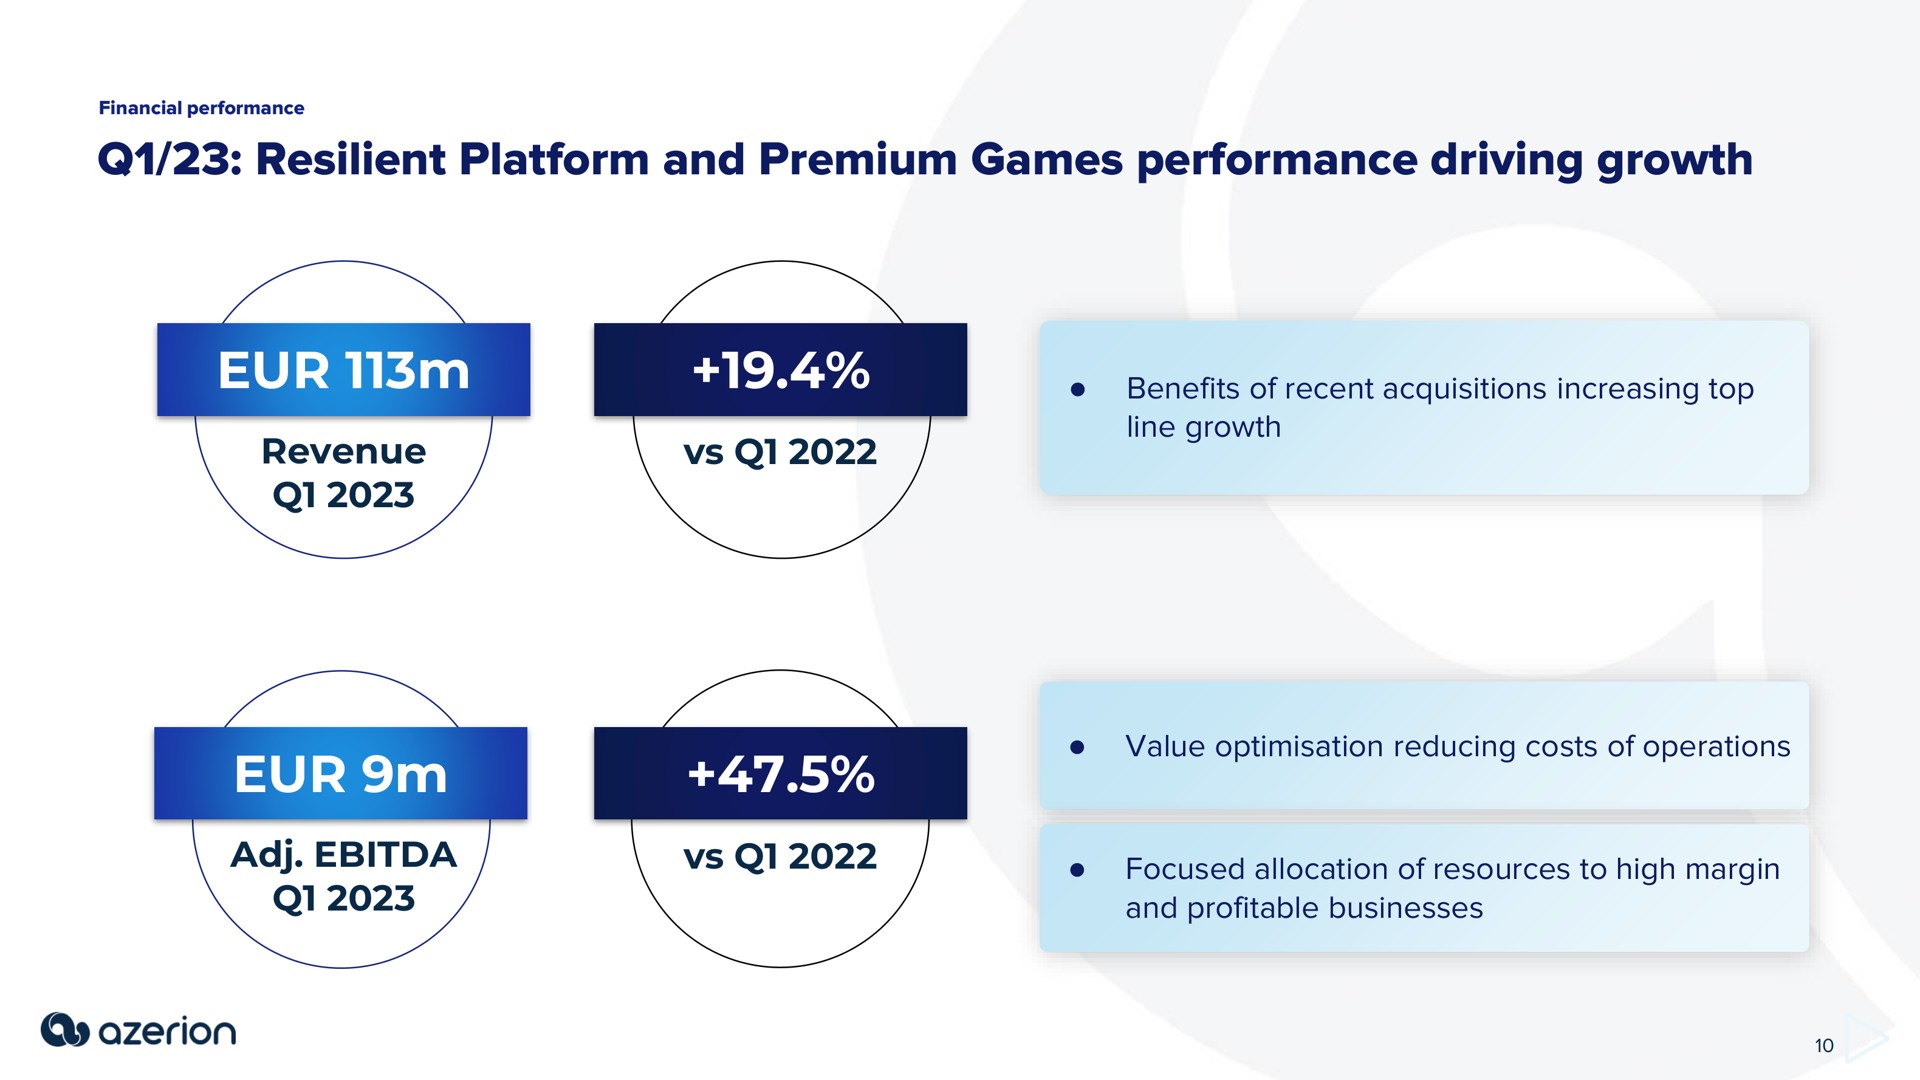 resilient platform and premium games performance driving growth yen | Azerion